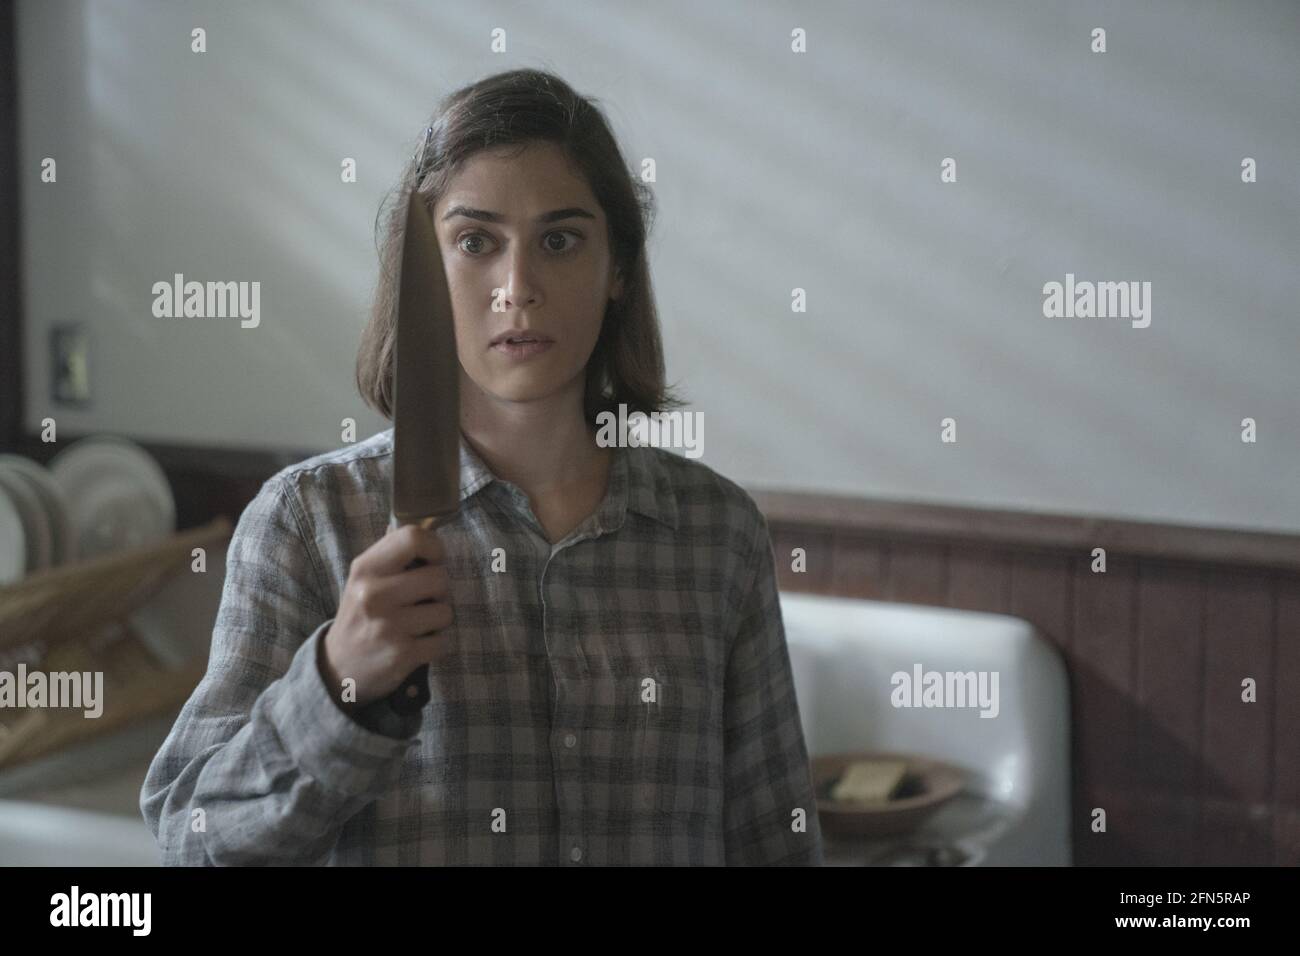 Castle Rock (TV series), starring starring Lizzy Caplan as Annie Wilkes Stock Photo